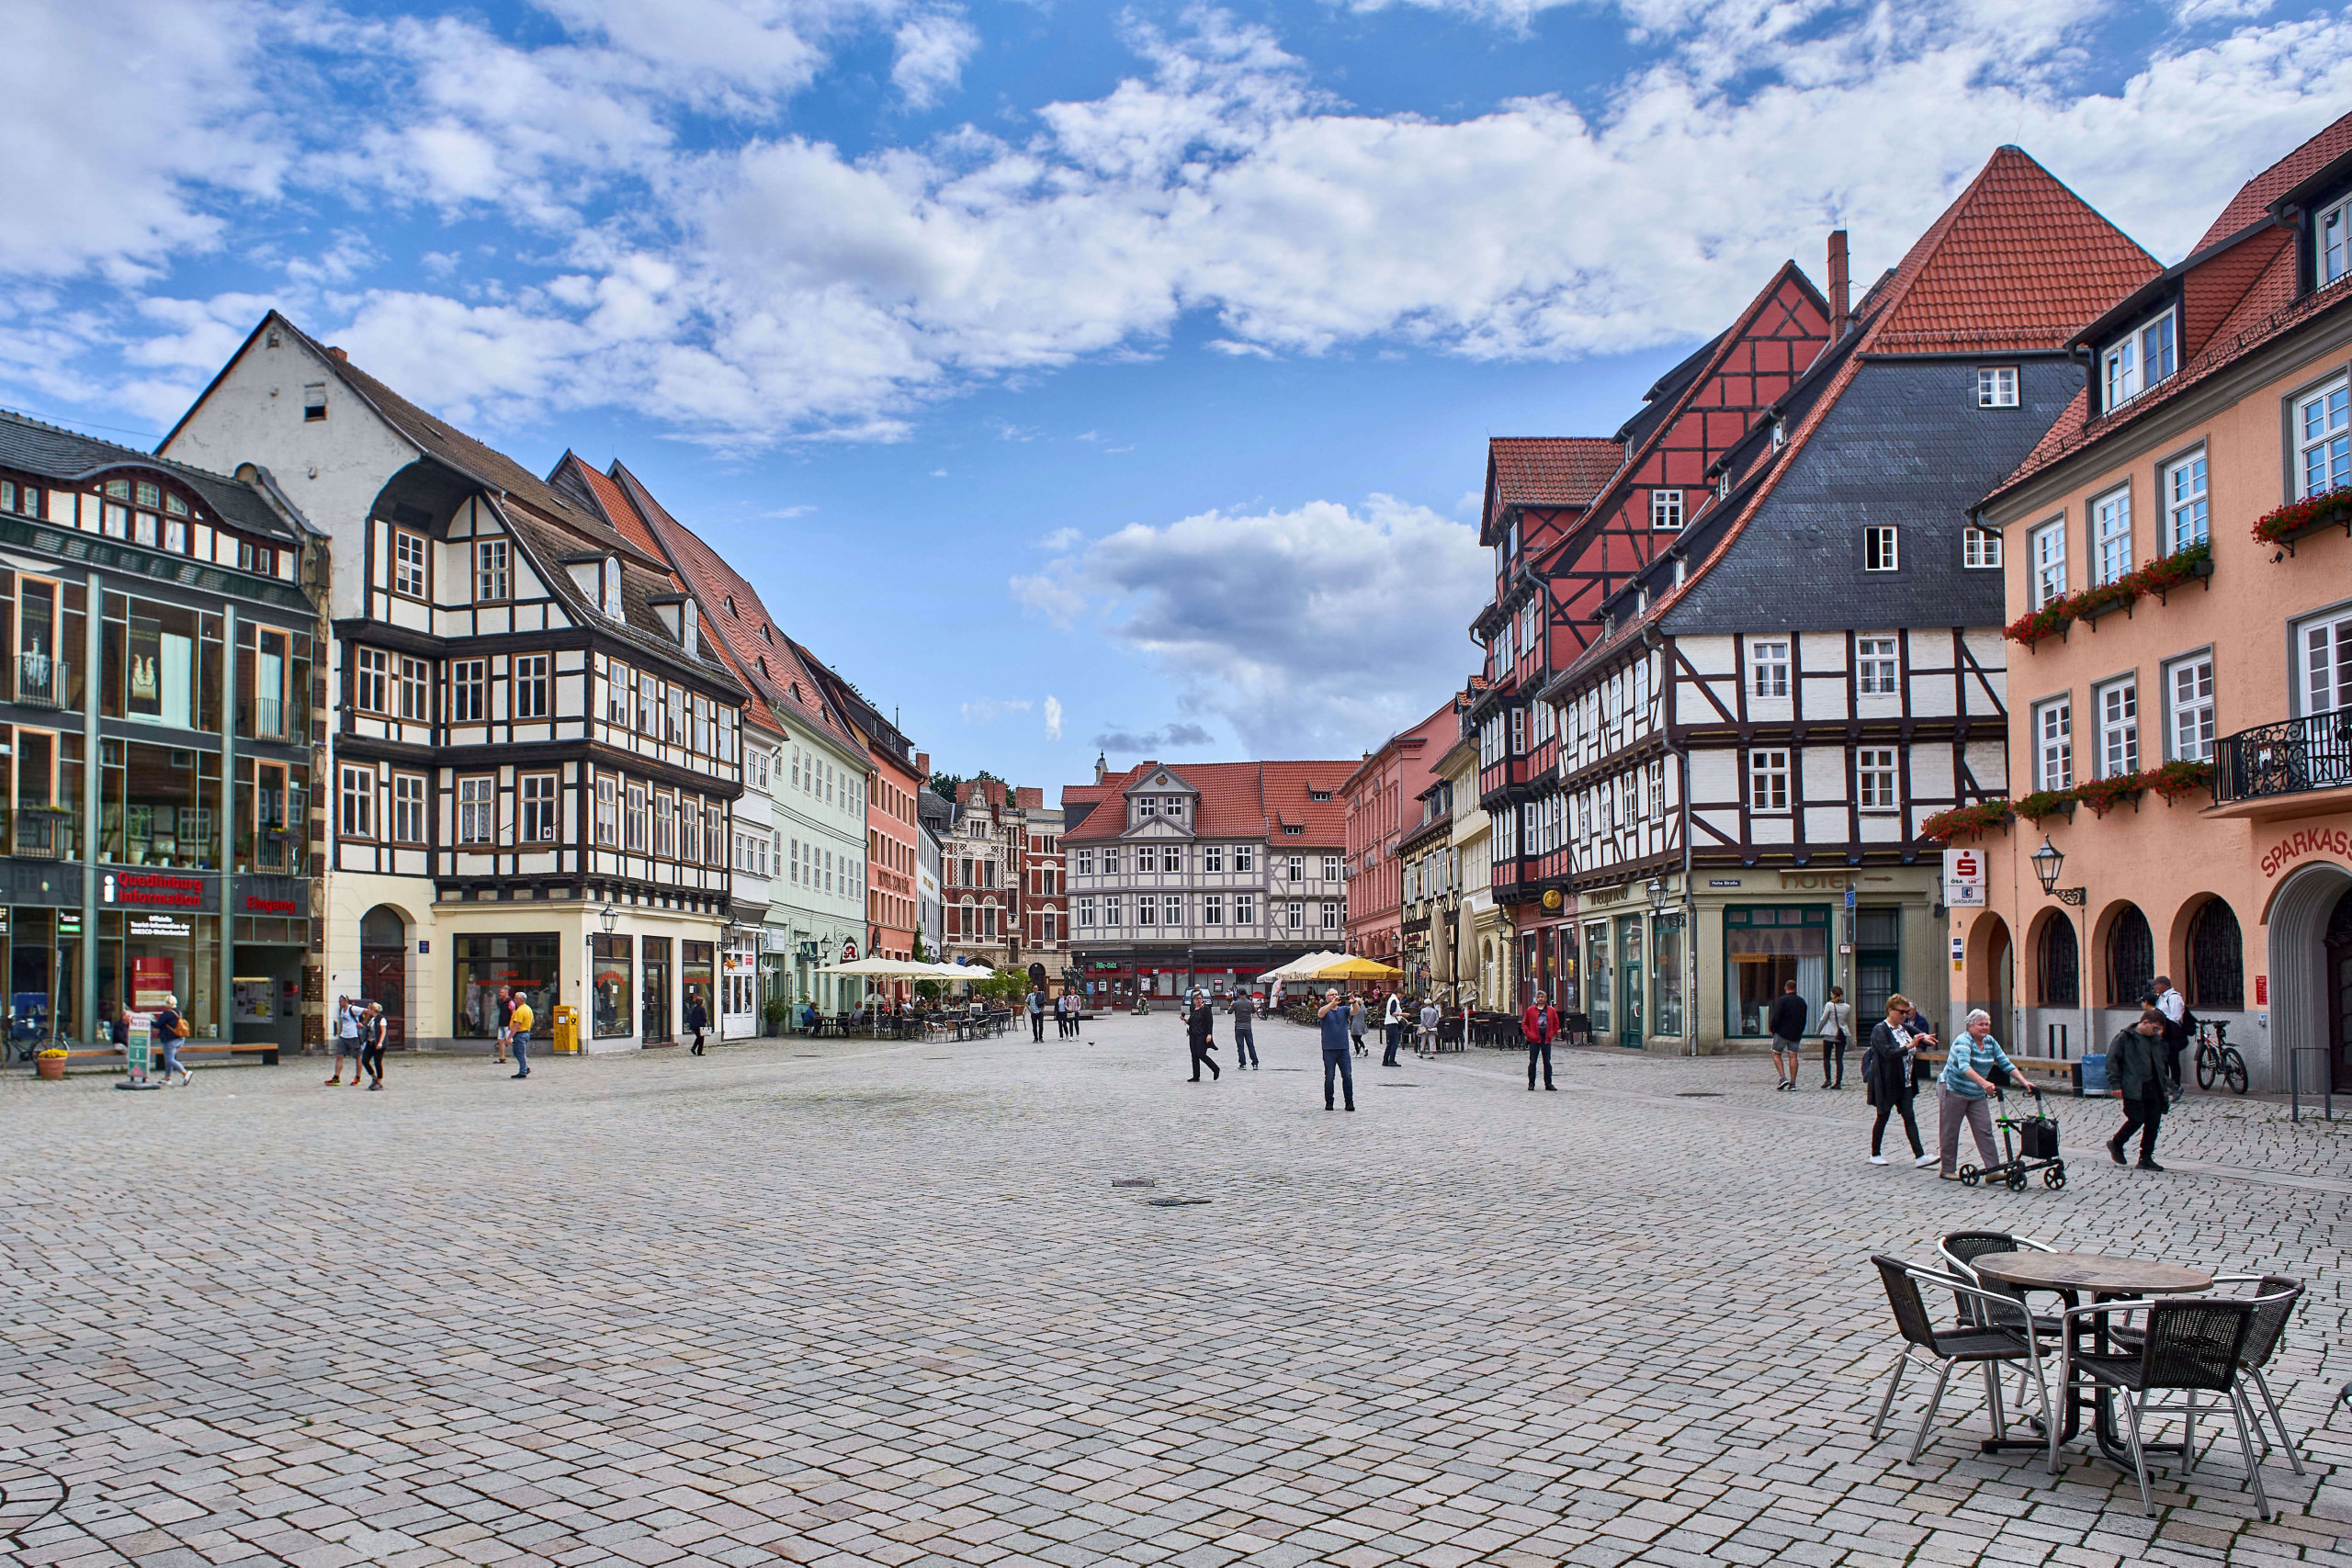 The Old Town of Quedlinburg in the Harz Mountains, Germany - My Magic Earth